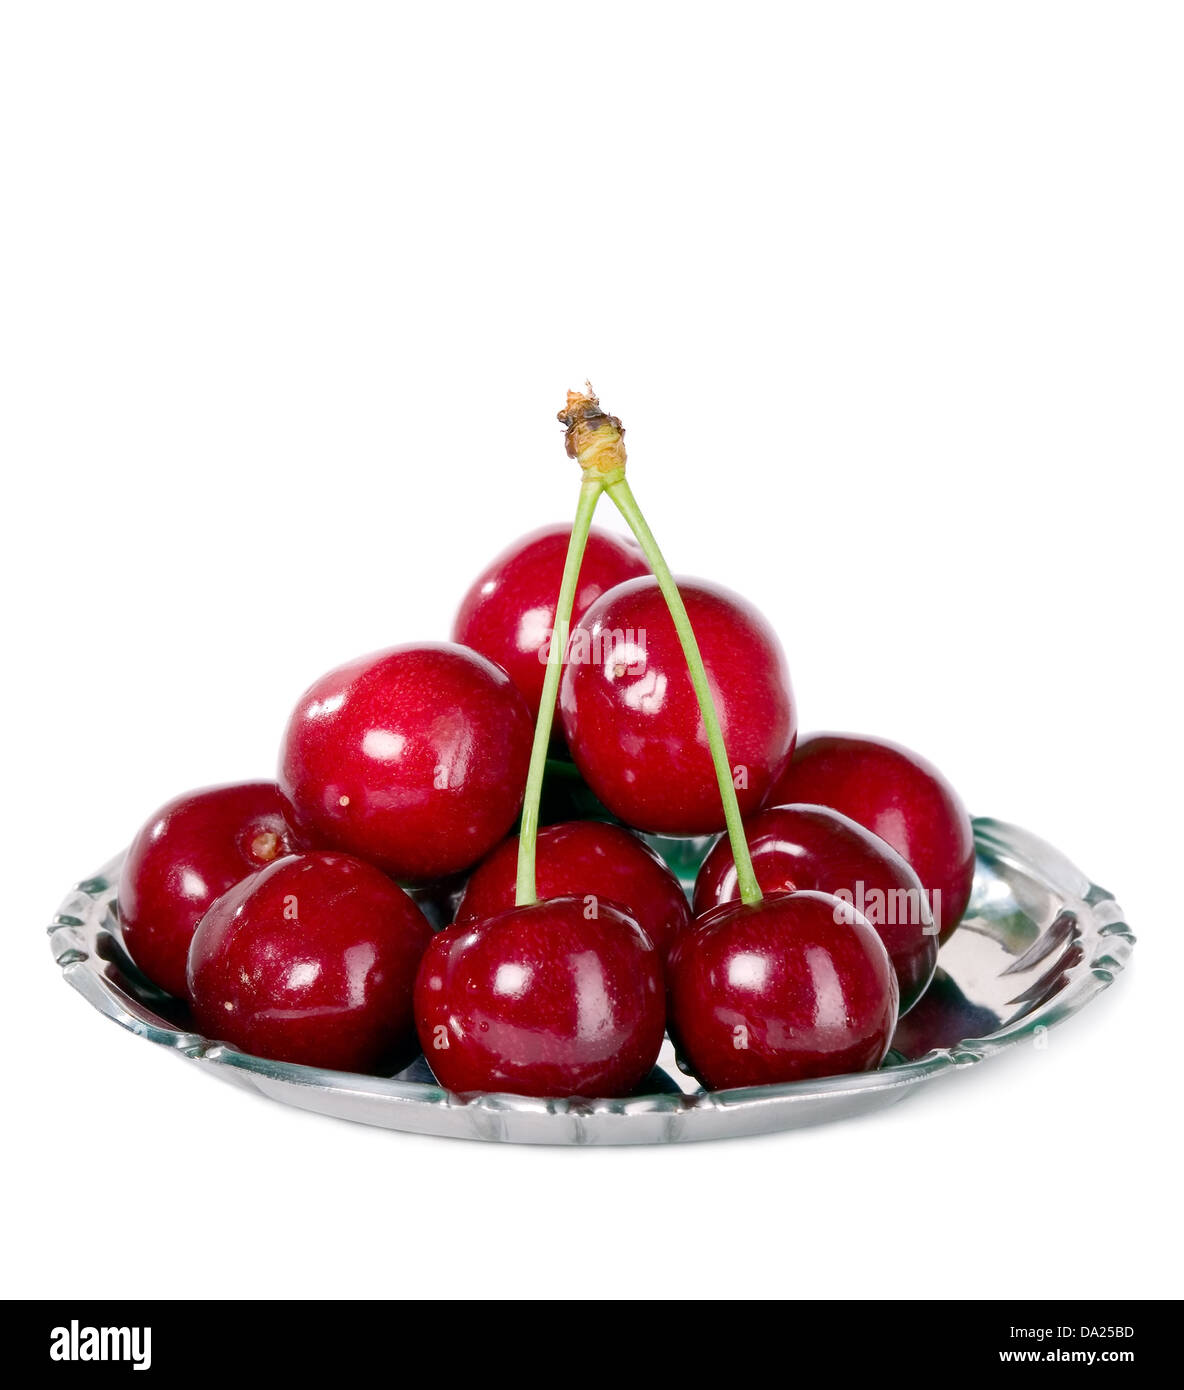 Sweet red cherry with green stalk, food concept Stock Photo